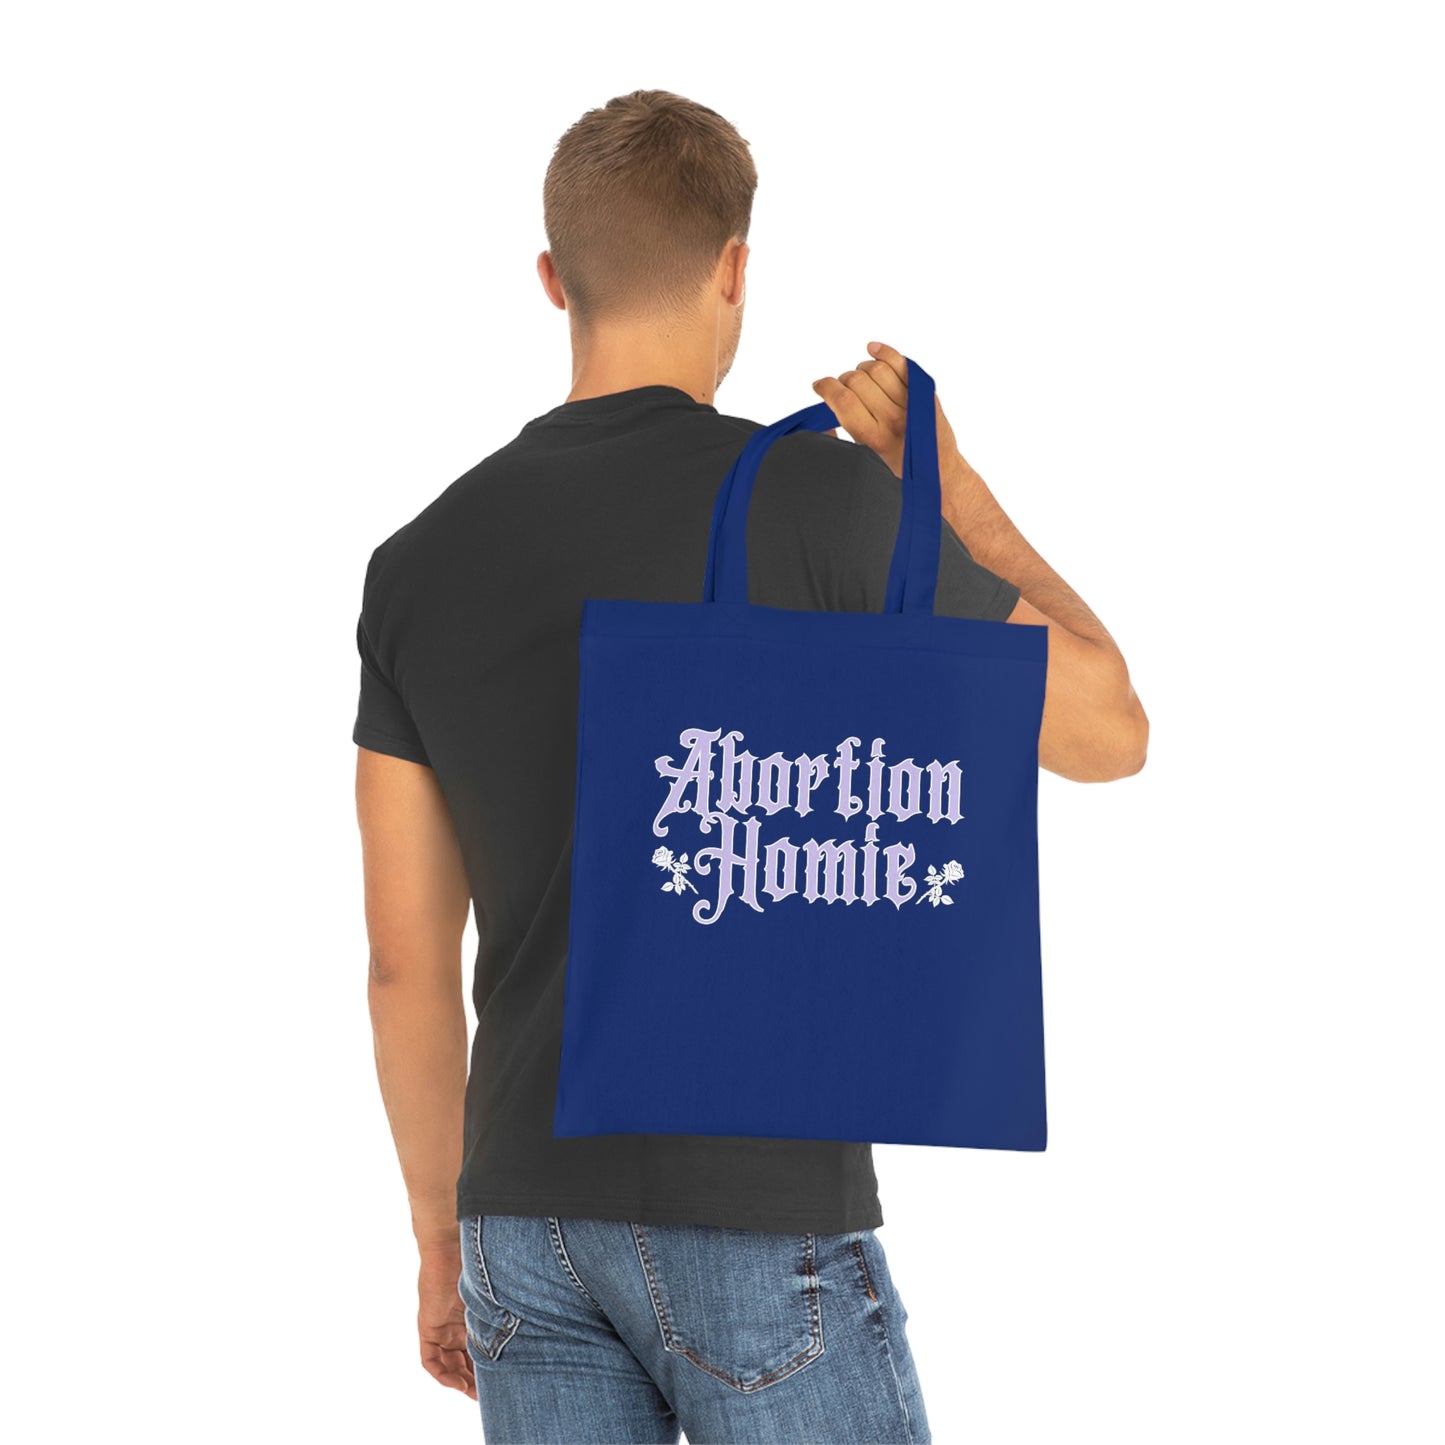 "Abortion Homie" Cotton Tote